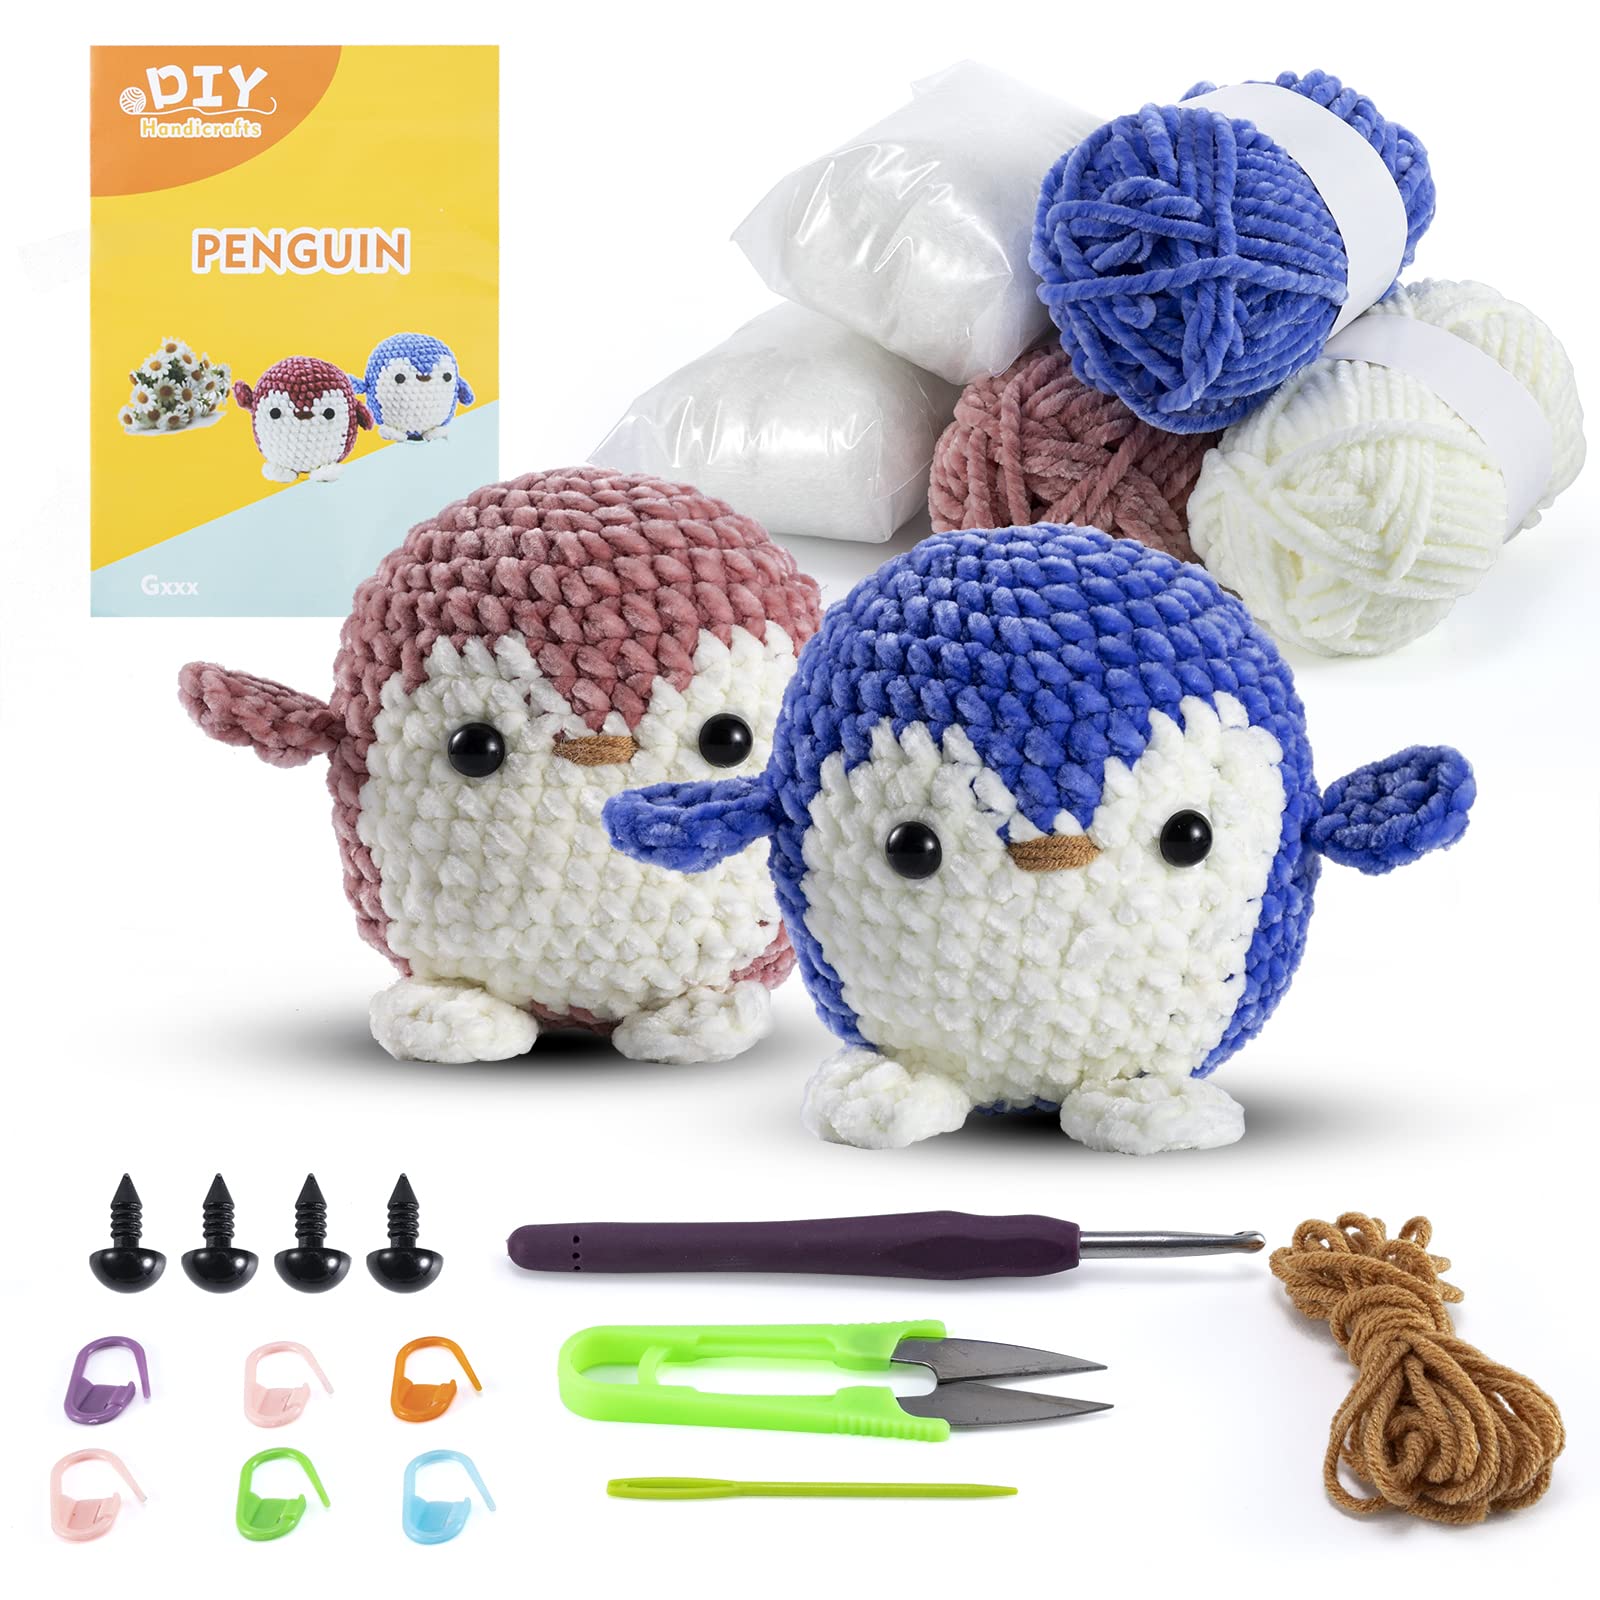 Crochet Kit for Kids Beginners and Adults, Learn to Crochet with Amigurumi  Crochet Kit for Beginners, Complete Christmas Crocheting Starter Kits with